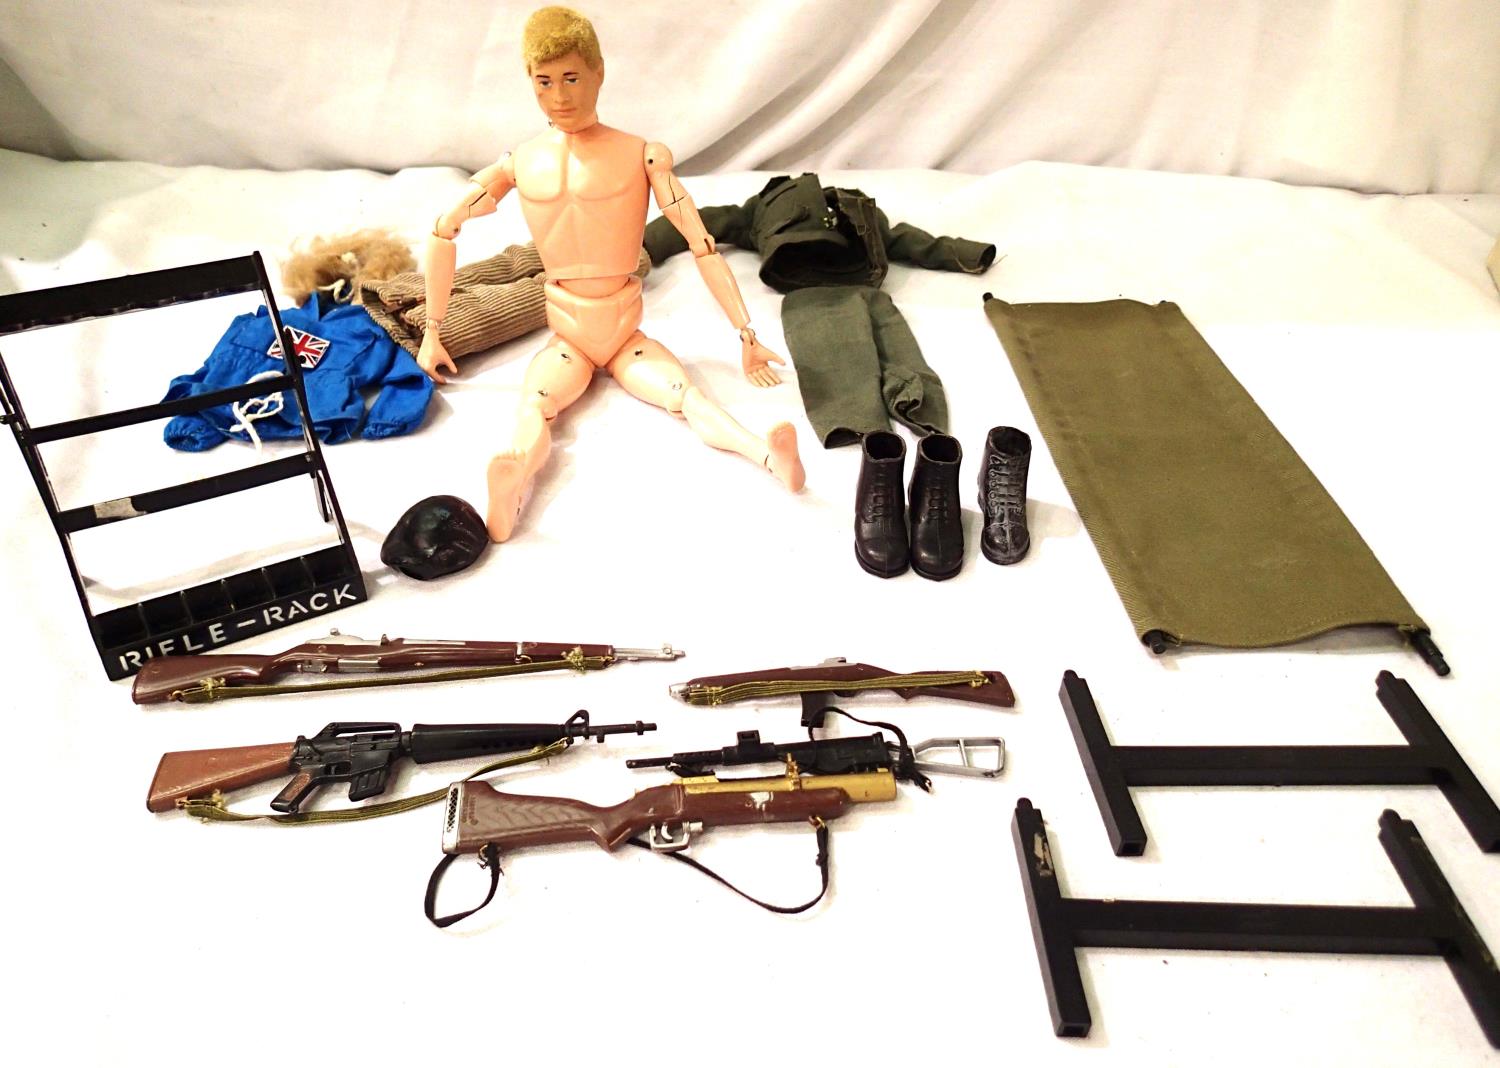 Action Man, flock hair c1964, cracks on arms and legs, also includes five rifles with rack,